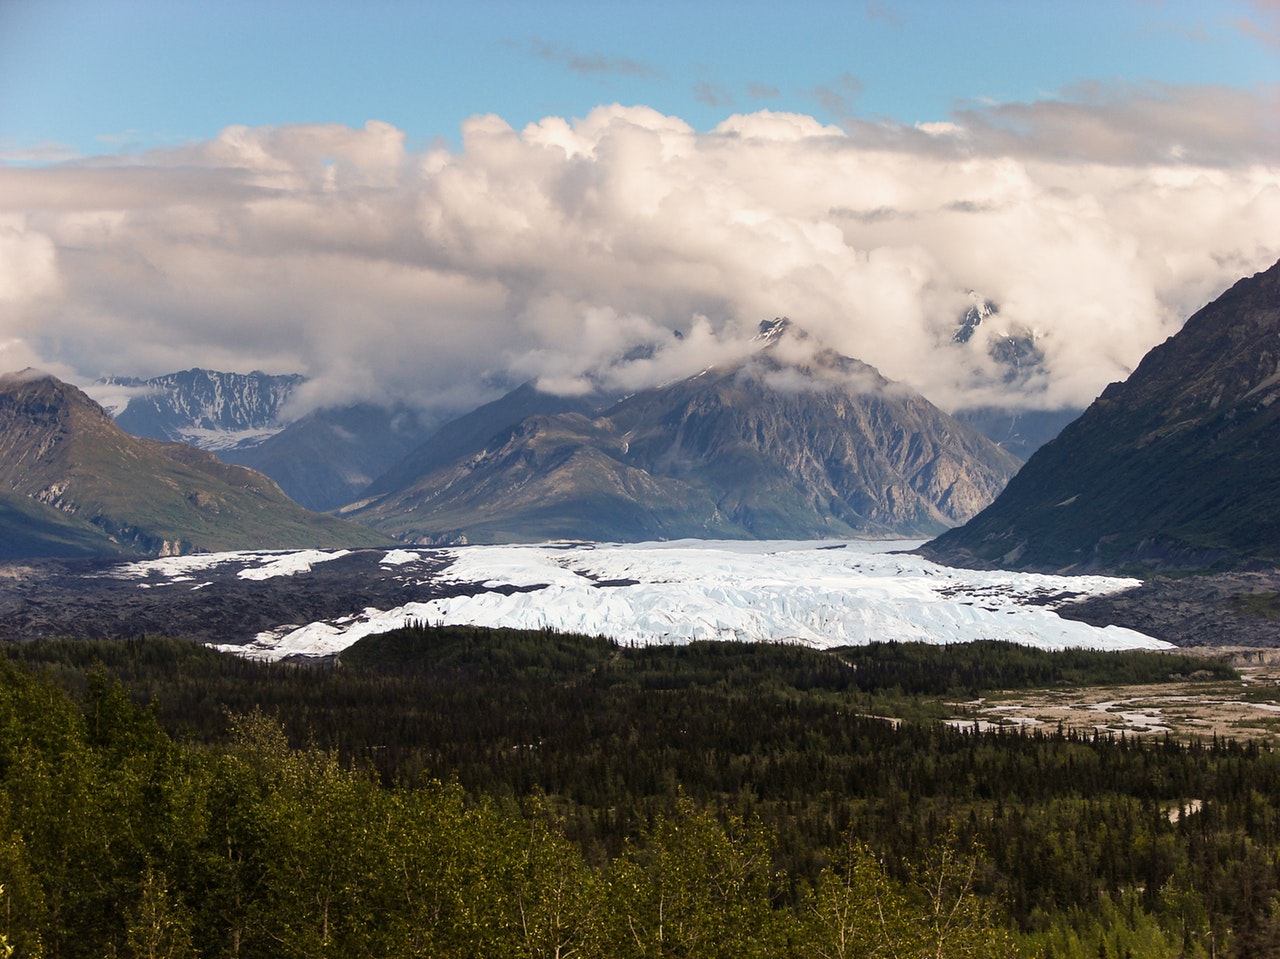 Reducing Dust Emissions Improves Quality of Life in Remote Alaskan Villages